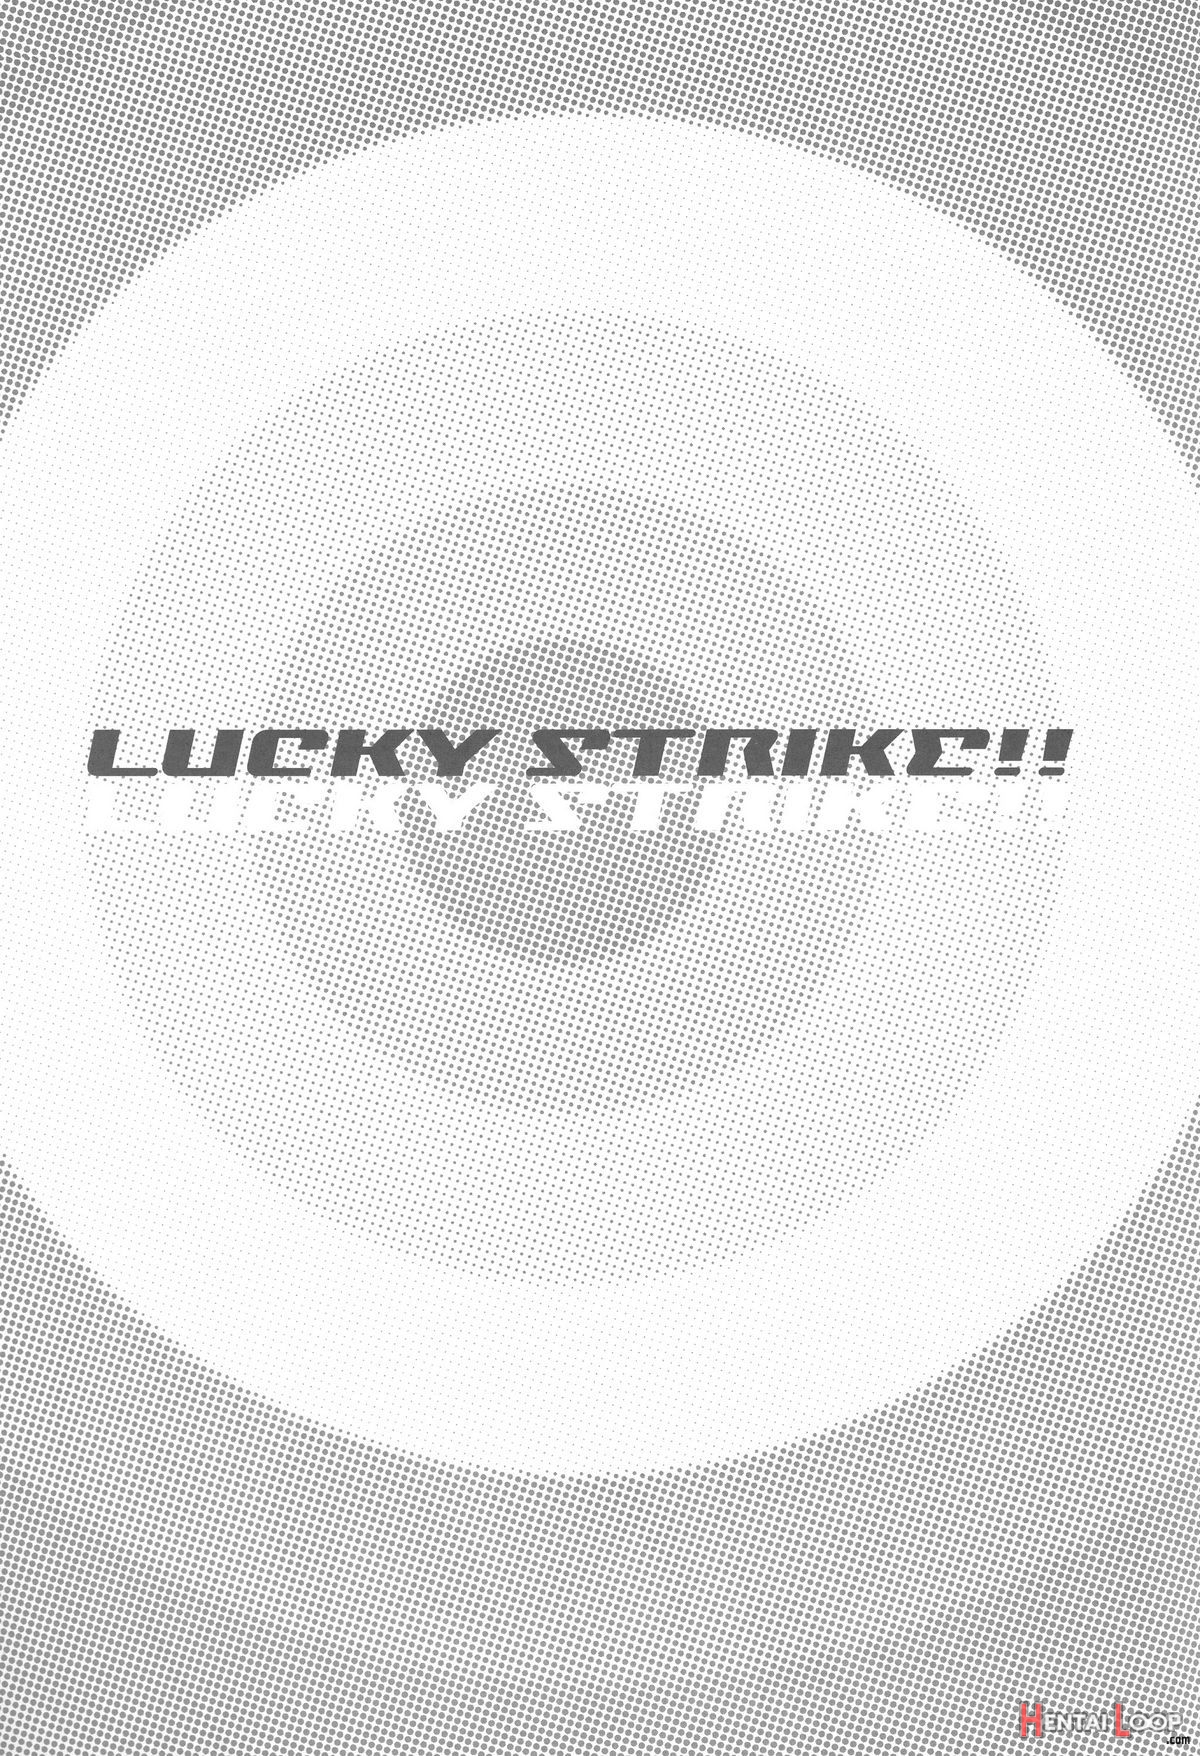 Lucky Strike!! page 2